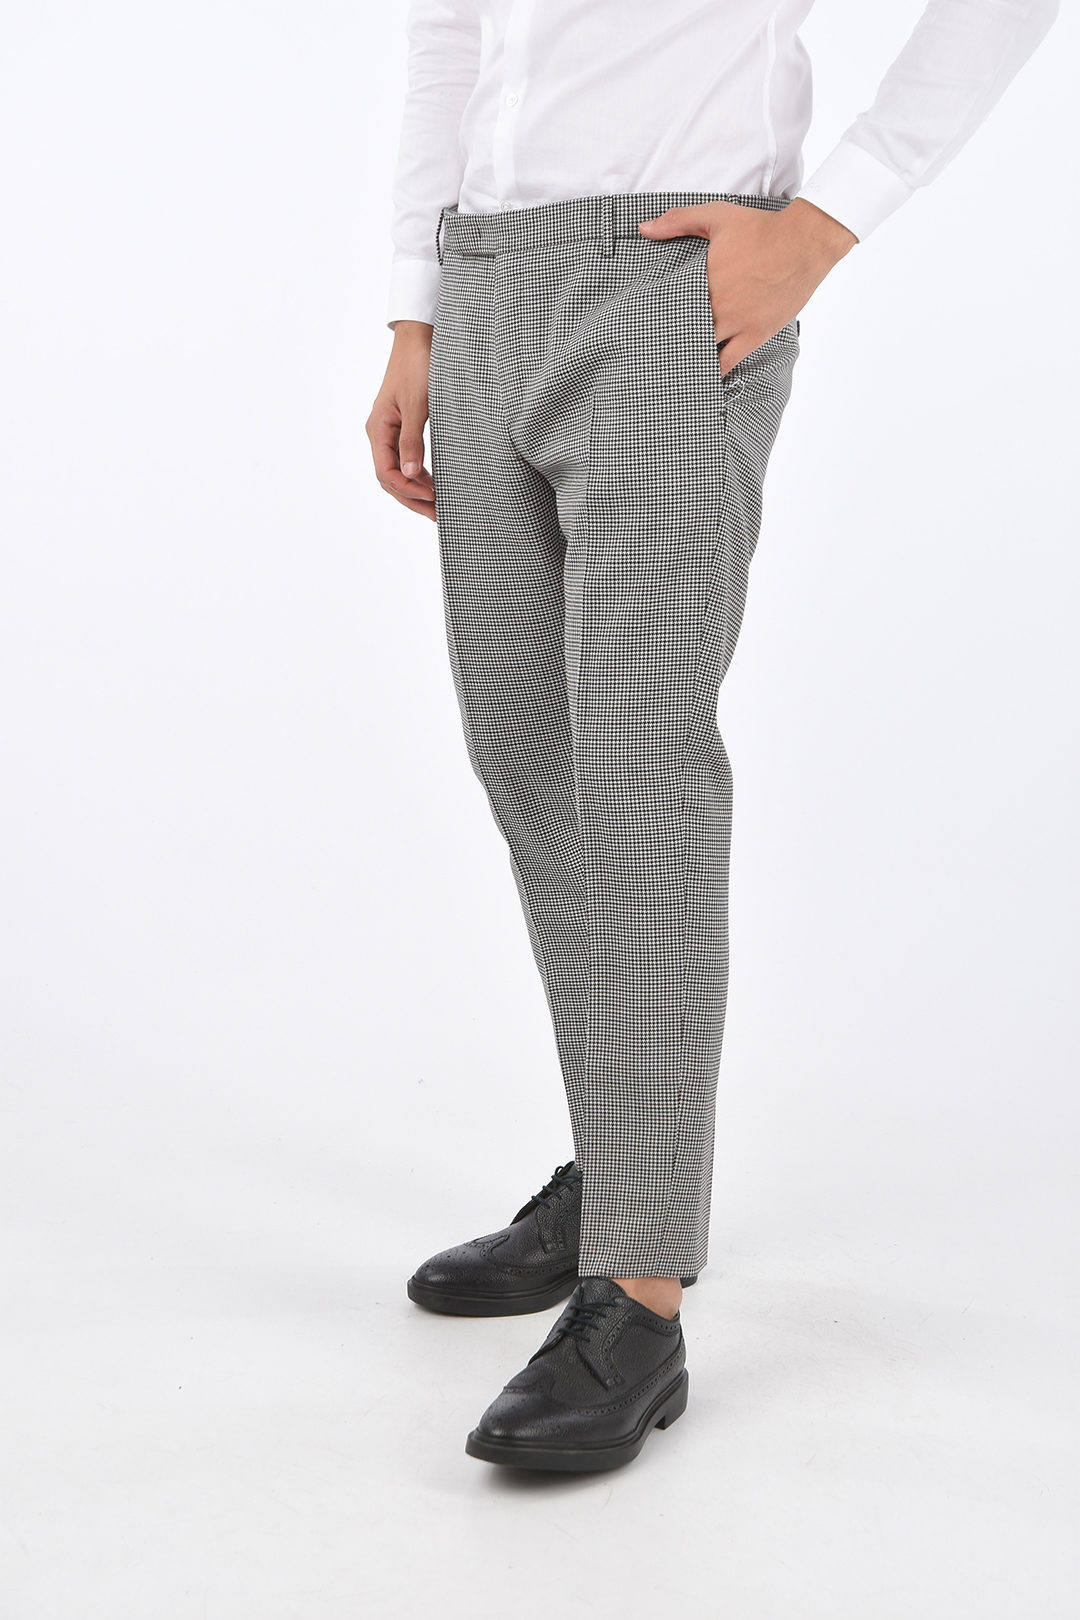 Belford Houndstooth with Hunter Green Pants (CAD)